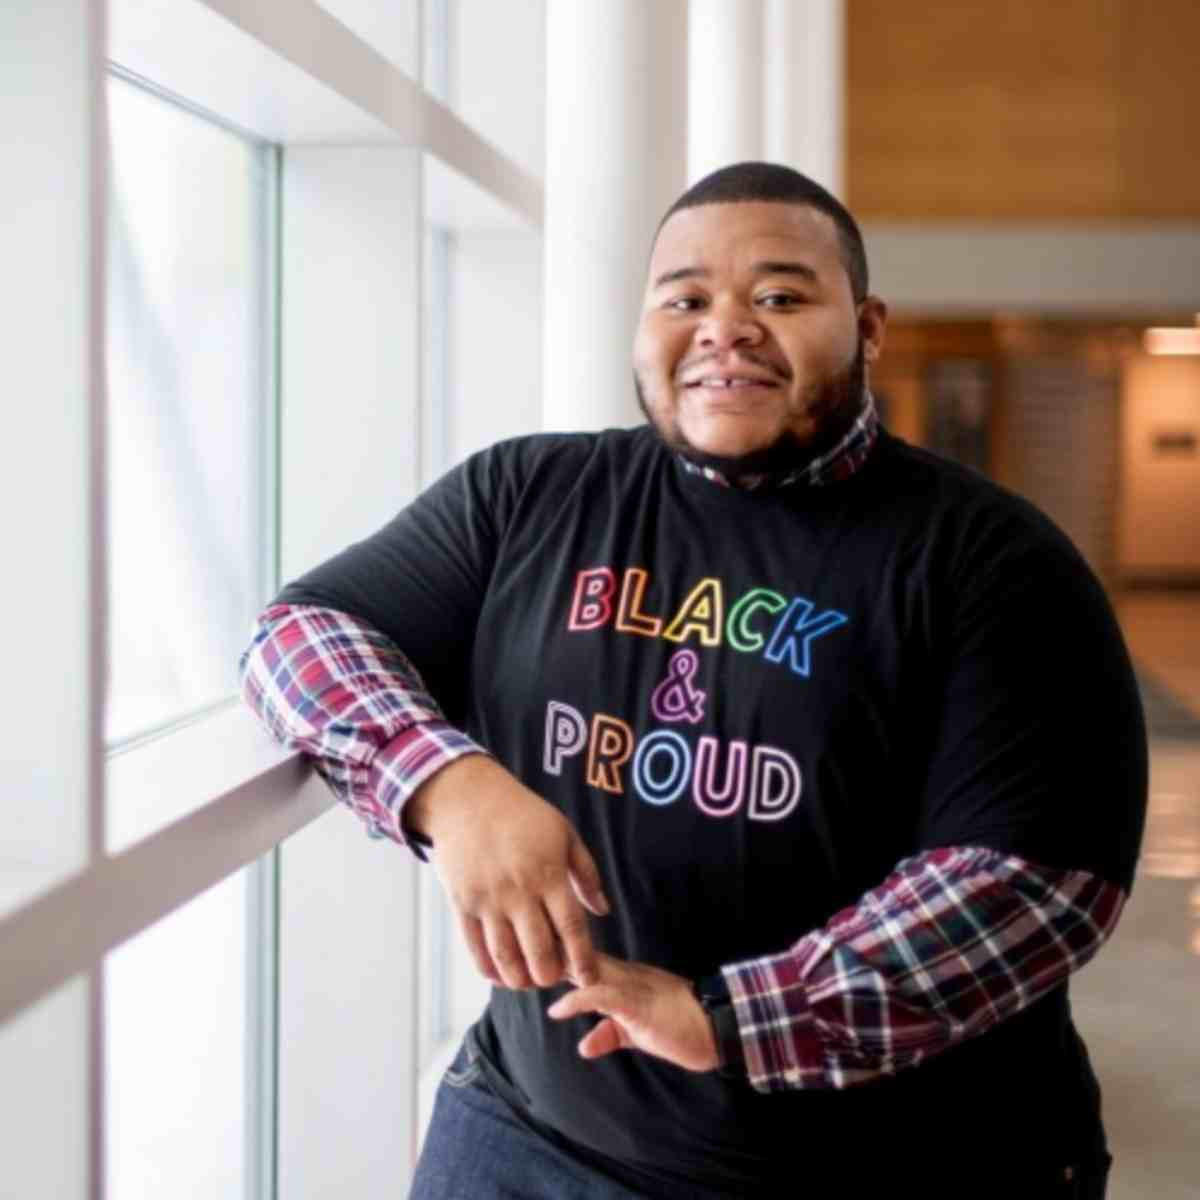 Staff with a "Black and Proud" t-shirt on for black history month